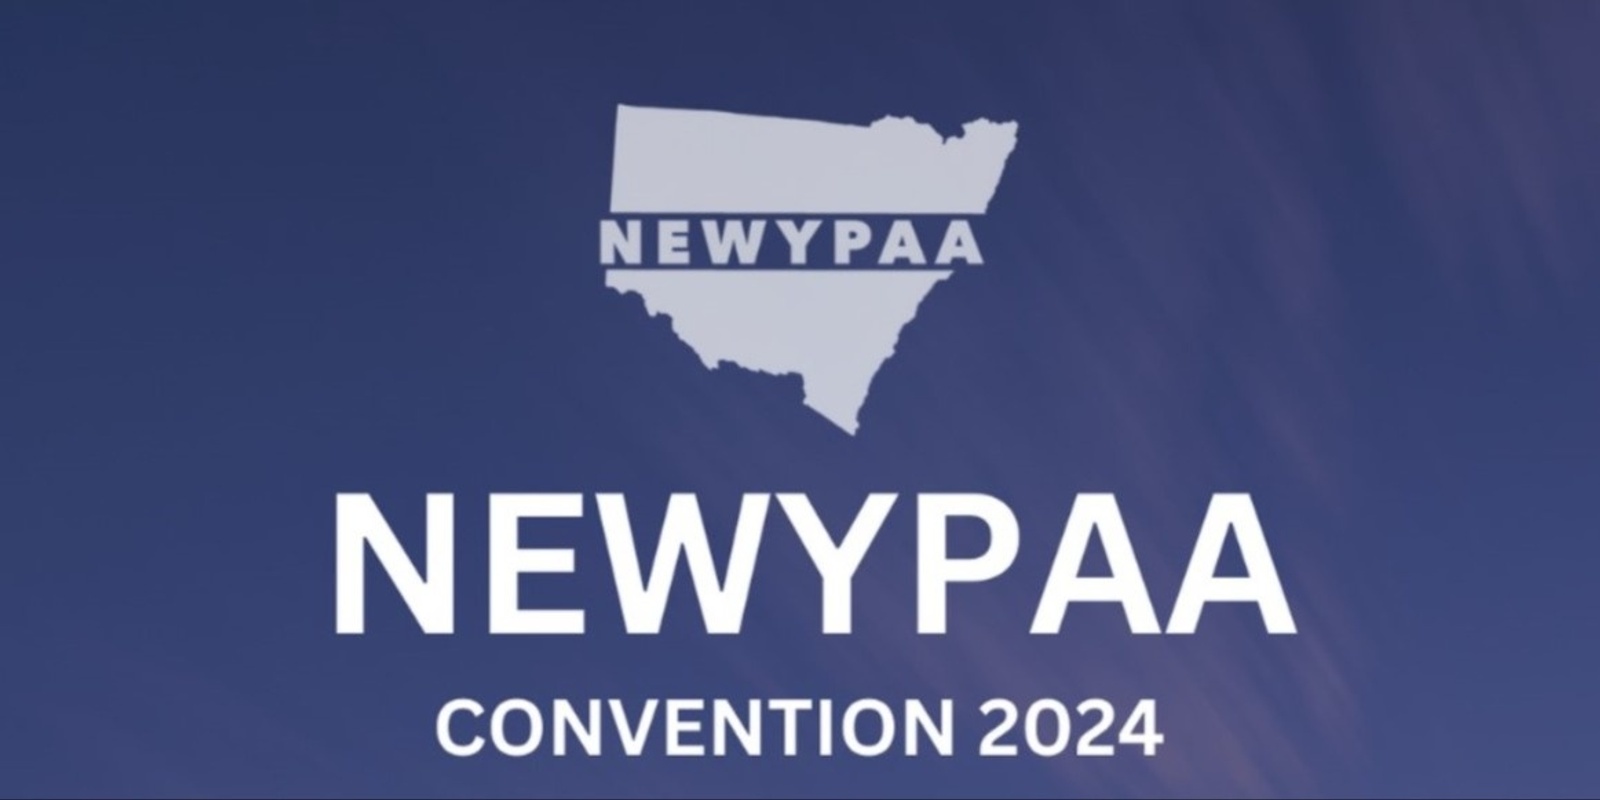 Banner image for NEWYPAA Convention 2024